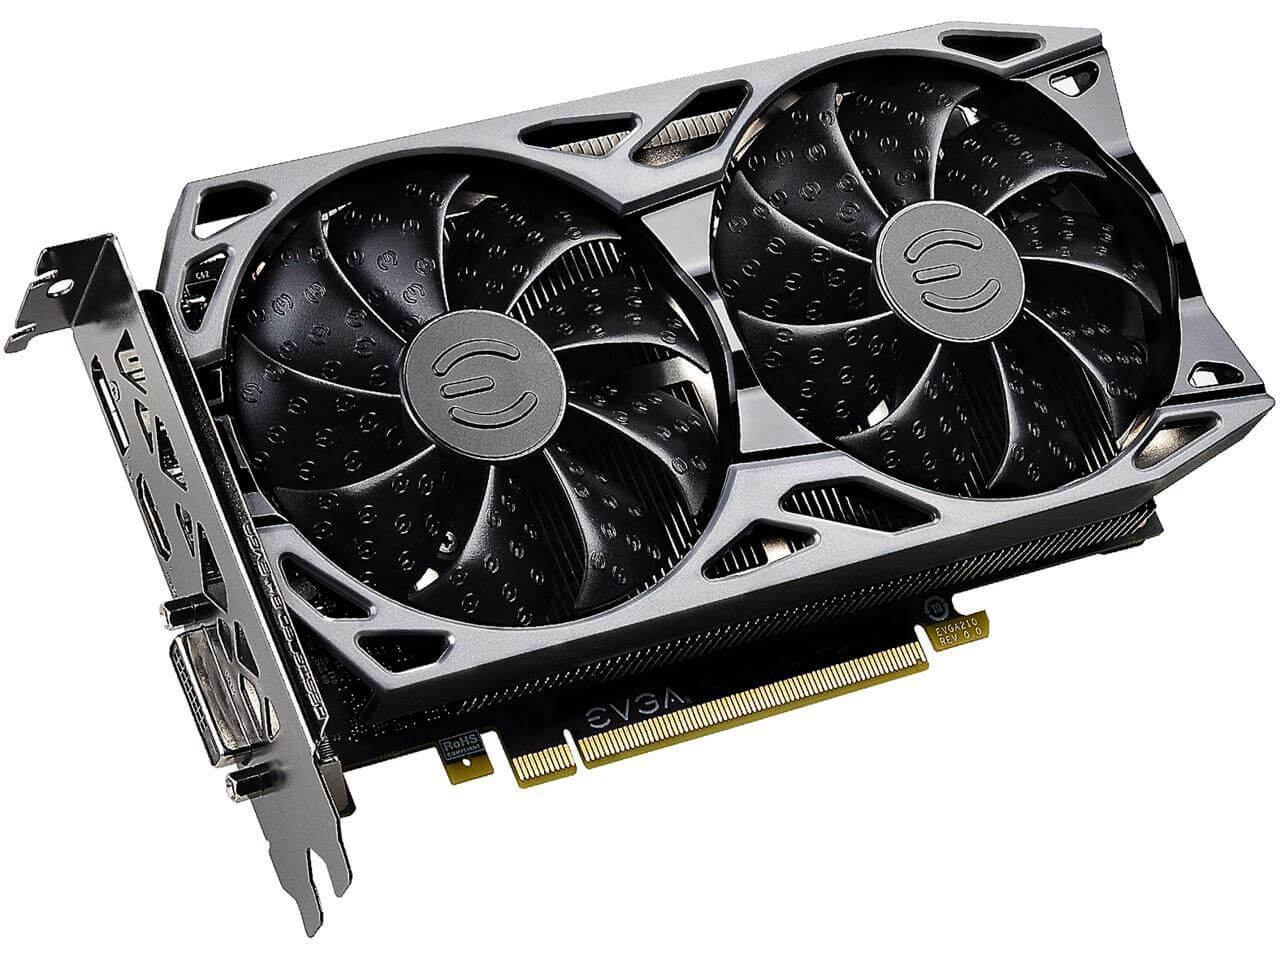 Best Graphics Cards For Gaming Gpu Buying Guide Jan 2020 Hardware Times